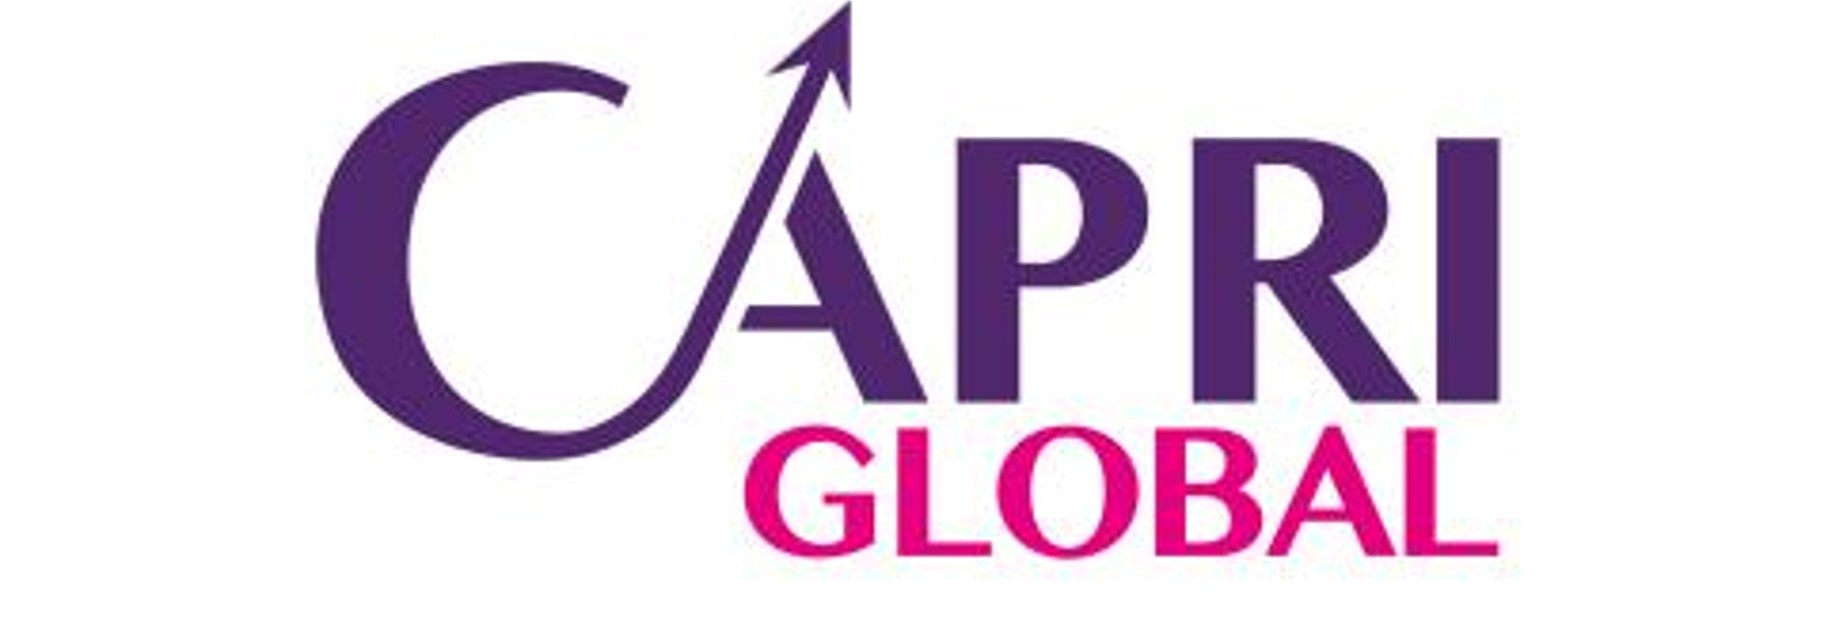 Capri Global has announced an association with Coaching Beyond, a premier cricket coaching institute, as a consultant for the franchise team of the UAE ILT20 League